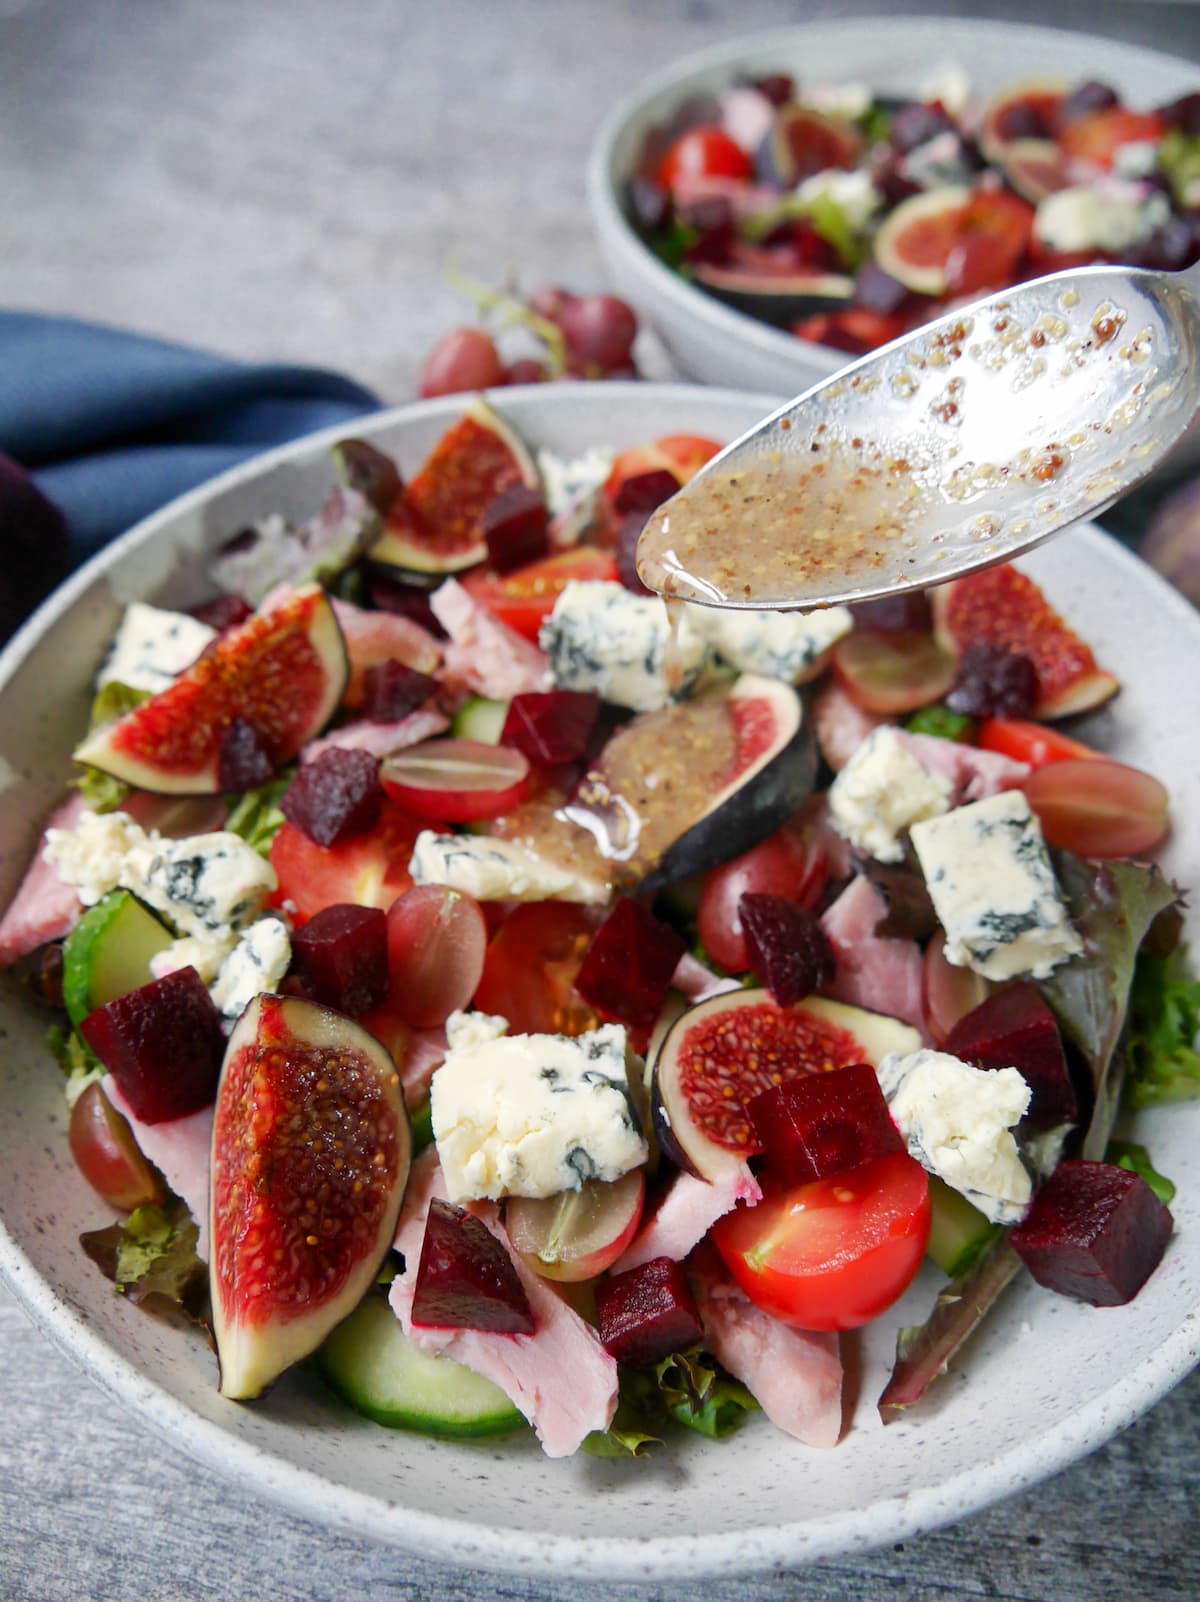 Red wine vinagrette dressing being poured over a bowl of ham salad with figs and blue cheese.